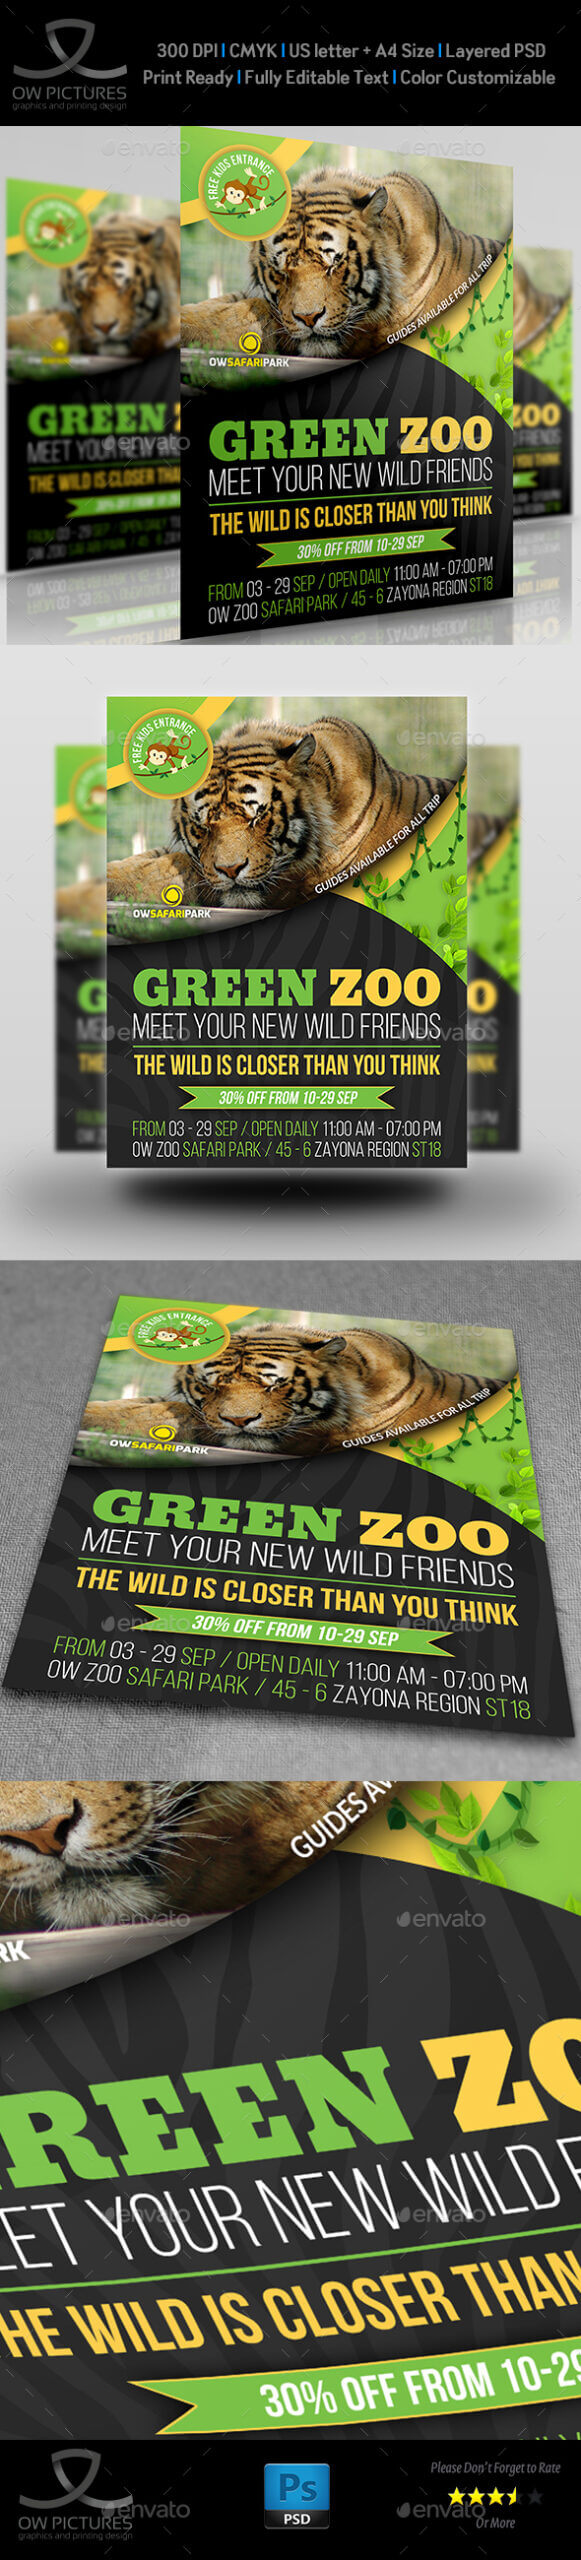 Zoo Flyer Graphics, Designs & Templates From Graphicriver Within Zoo Brochure Template